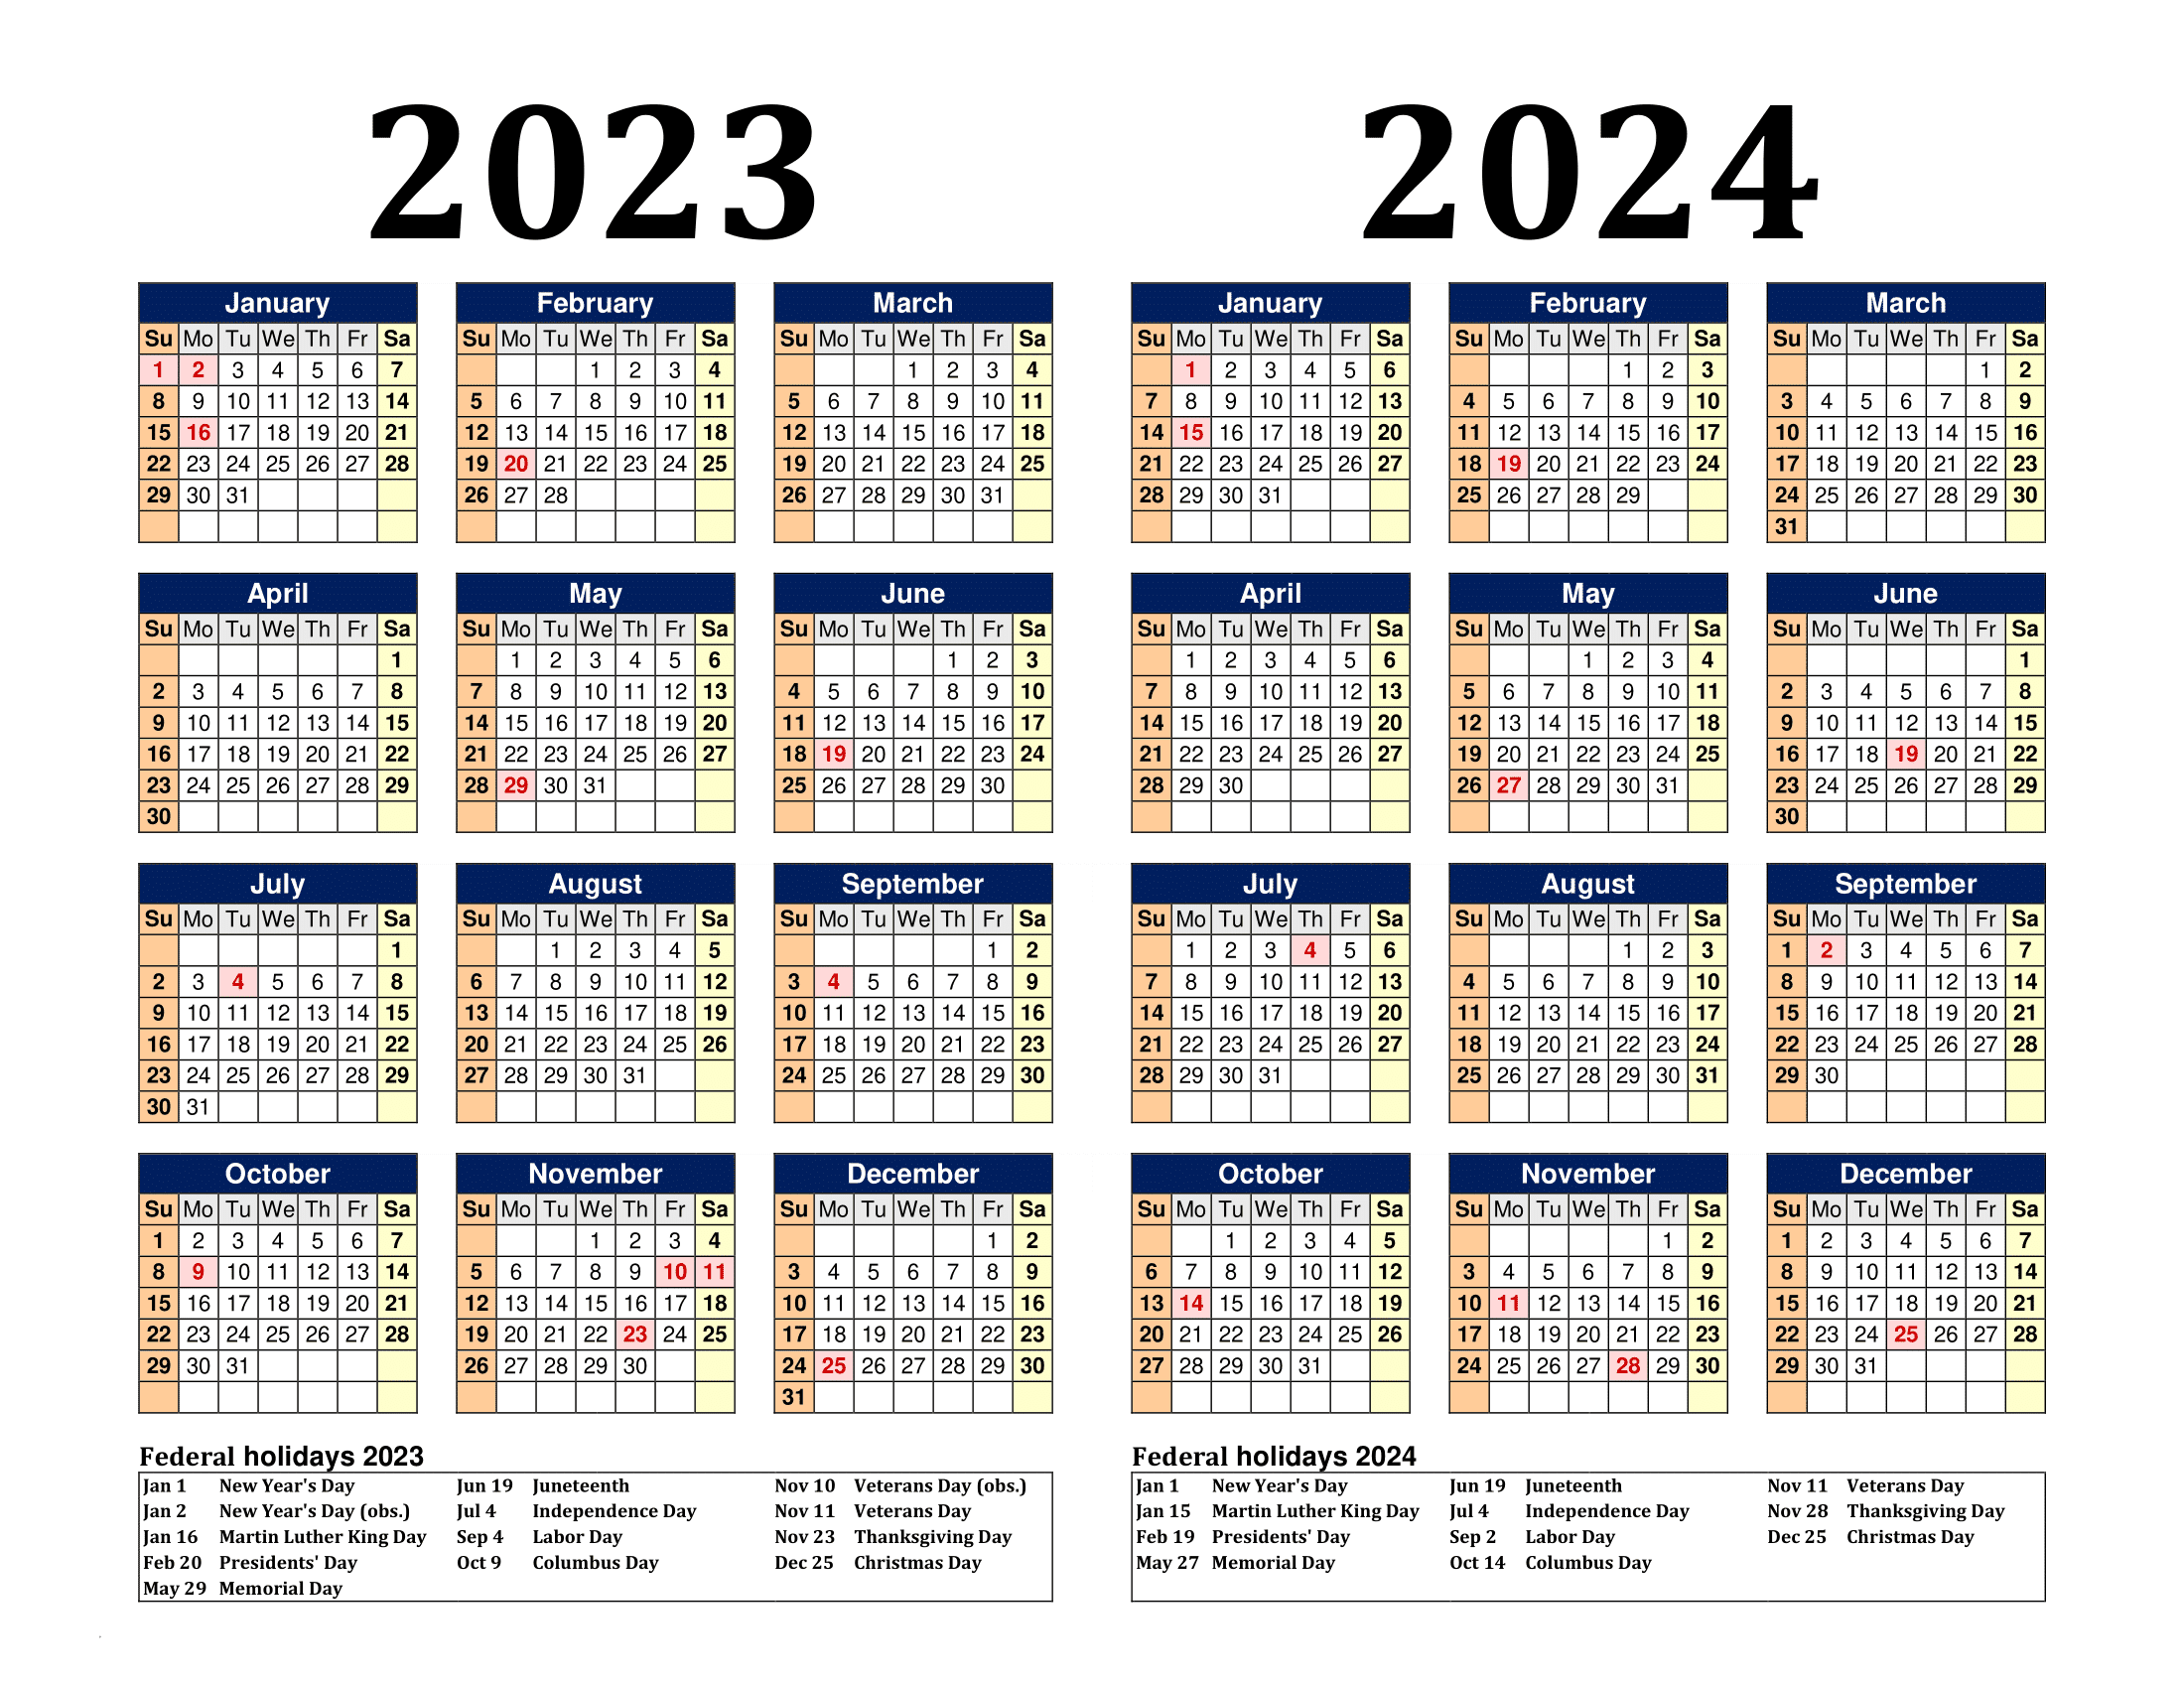 Free Printable Two Year Calendar Templates For 2023 And 2024 In Pdf for 2023 Calendar 2024 Printable Free